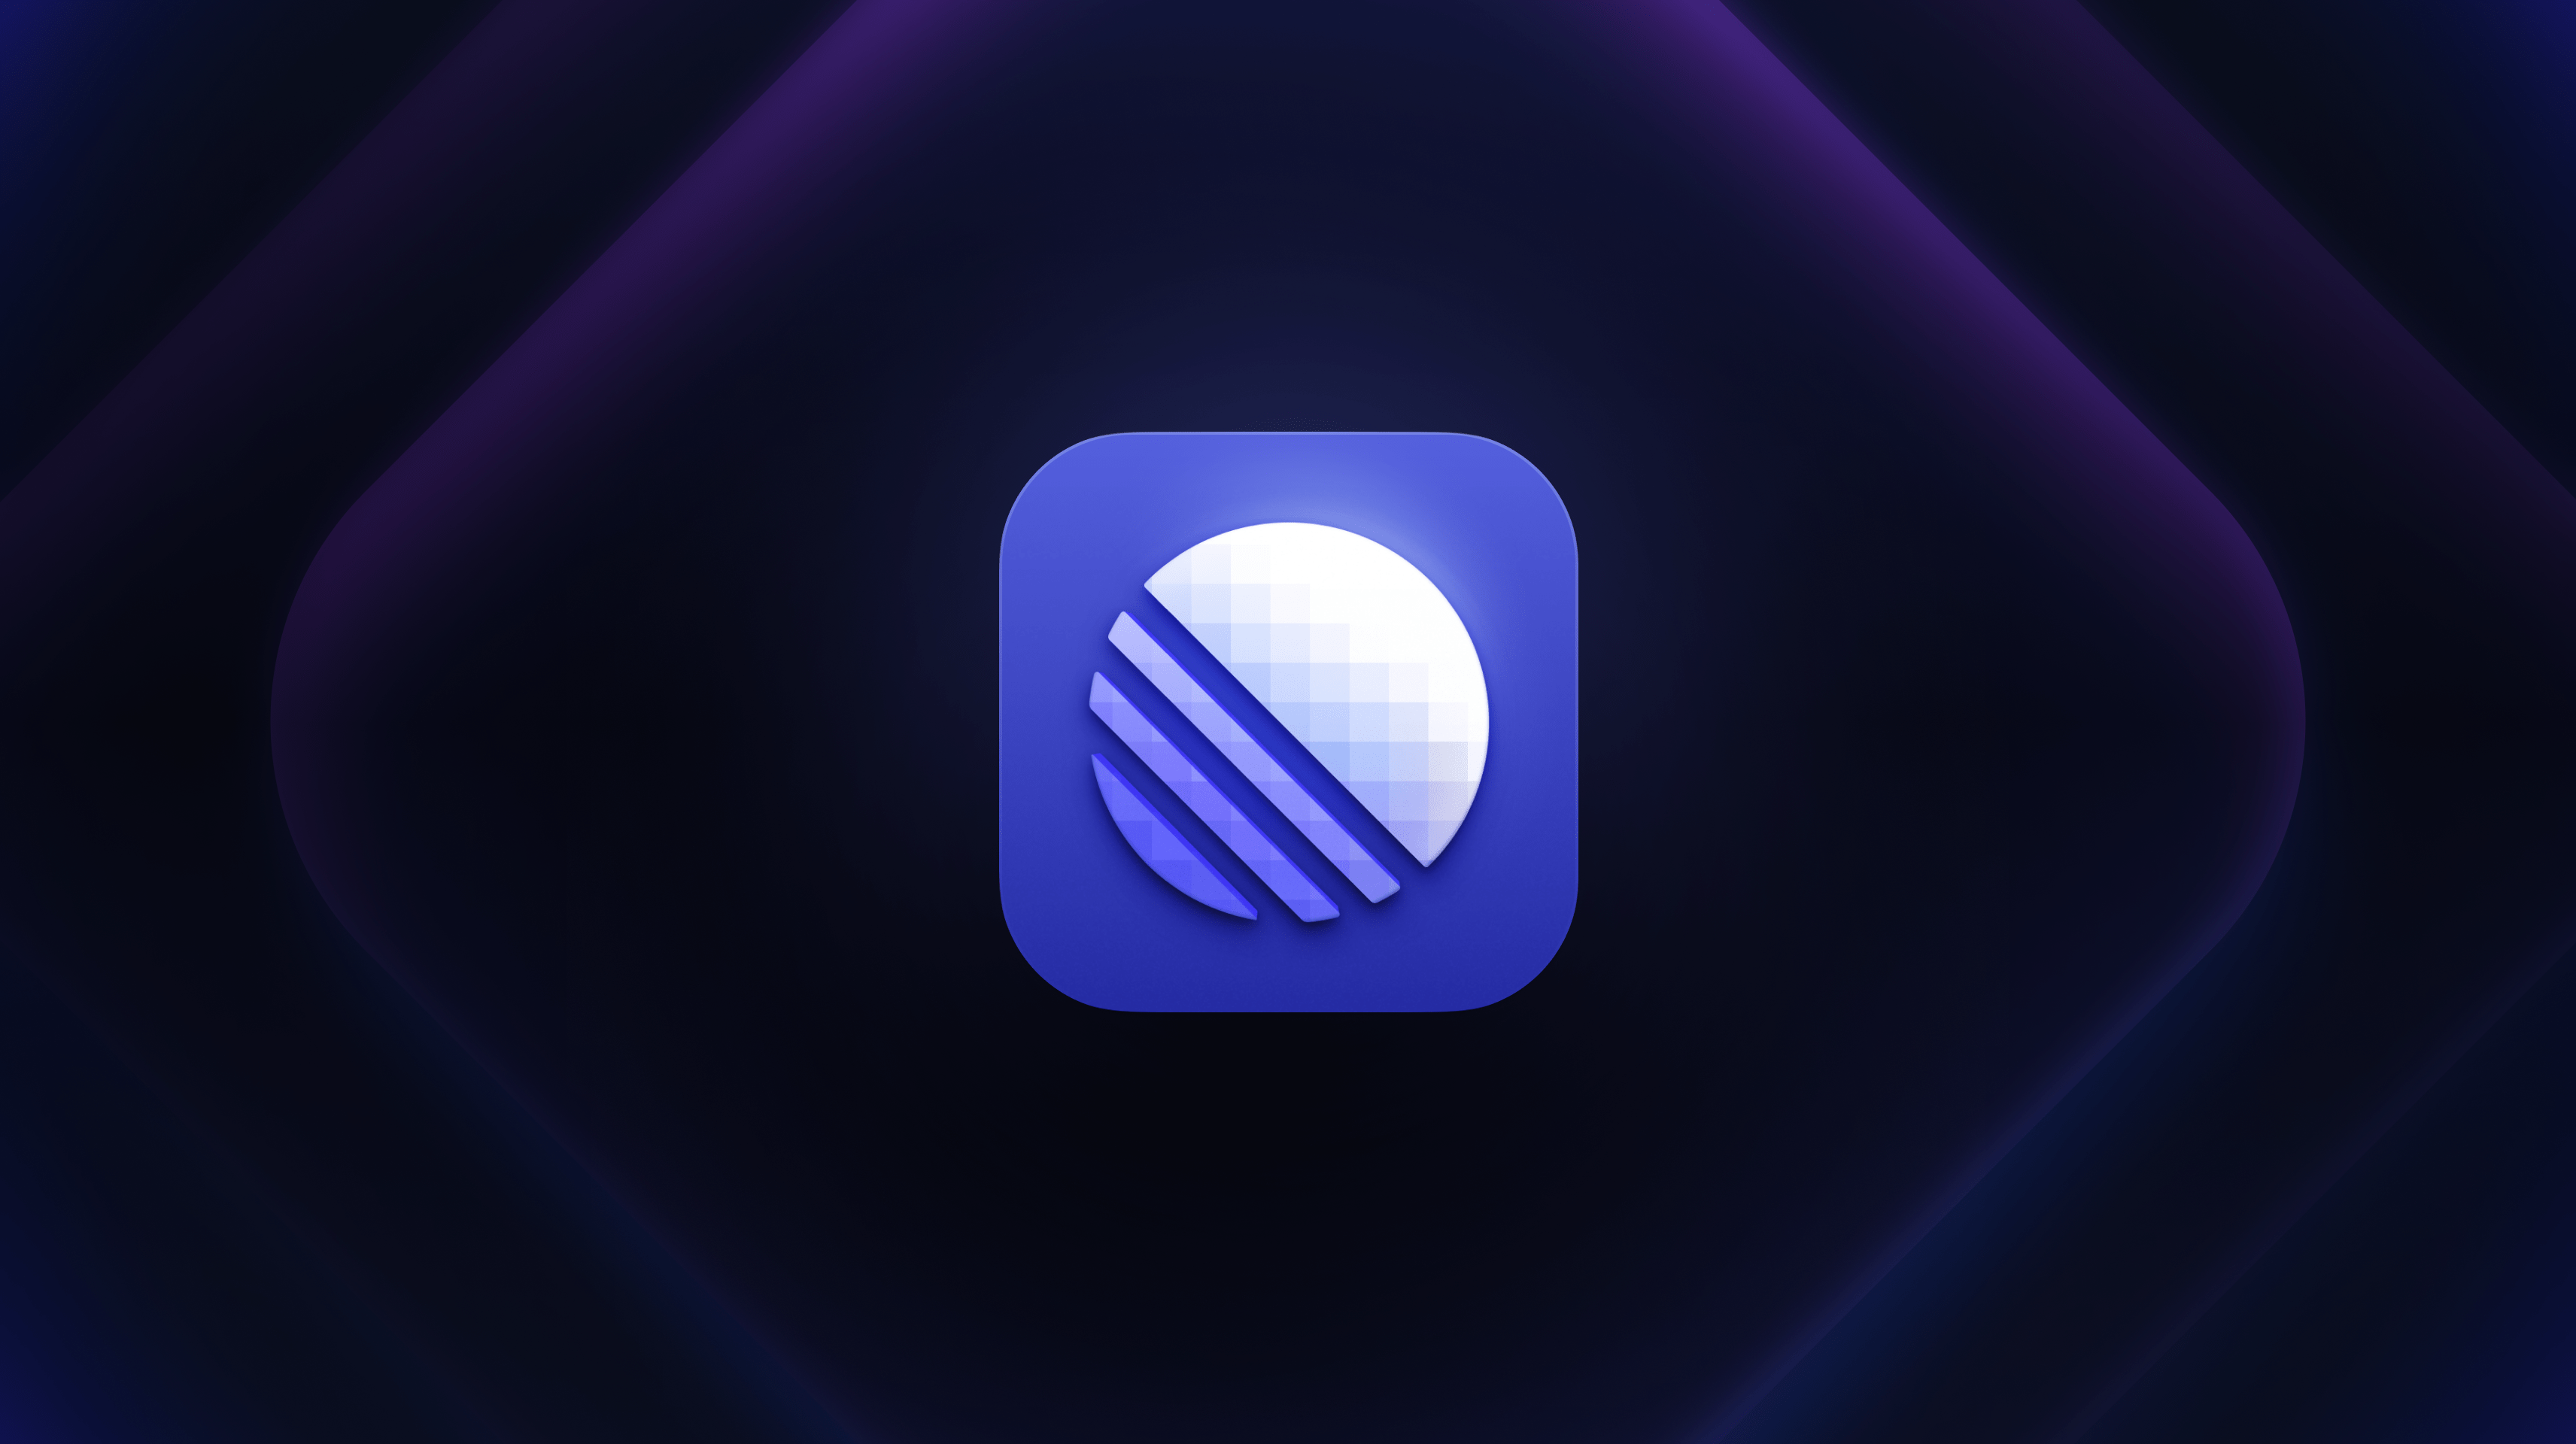 new desktop logo featuring Linear's circular white logo with faint grid lines and glow over a purple square background